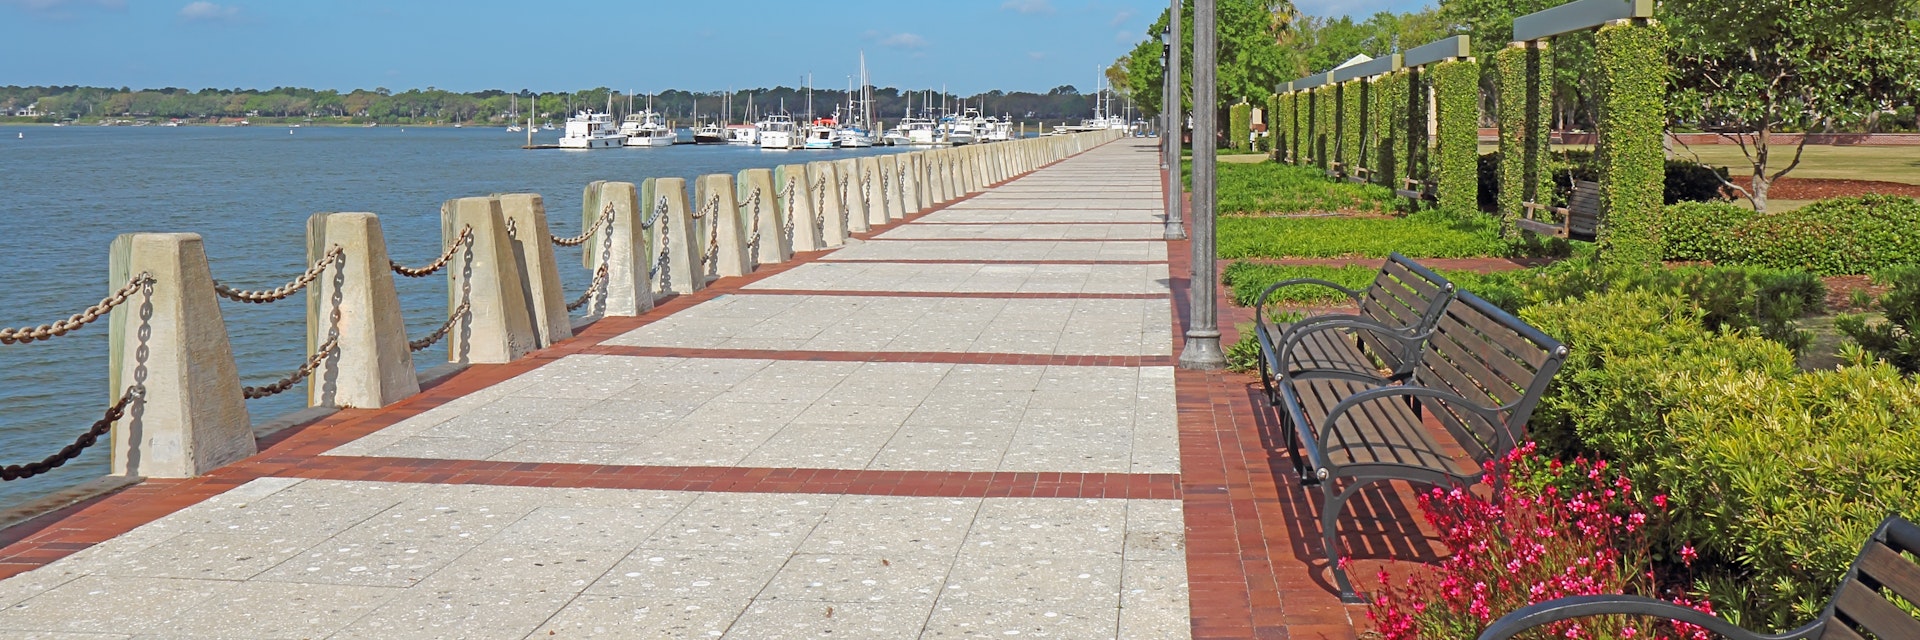 Promenade of the Henry C. Chambers Waterfront Park located south of Bay Street in the Historic District of downtown Beaufort, South Carolina.